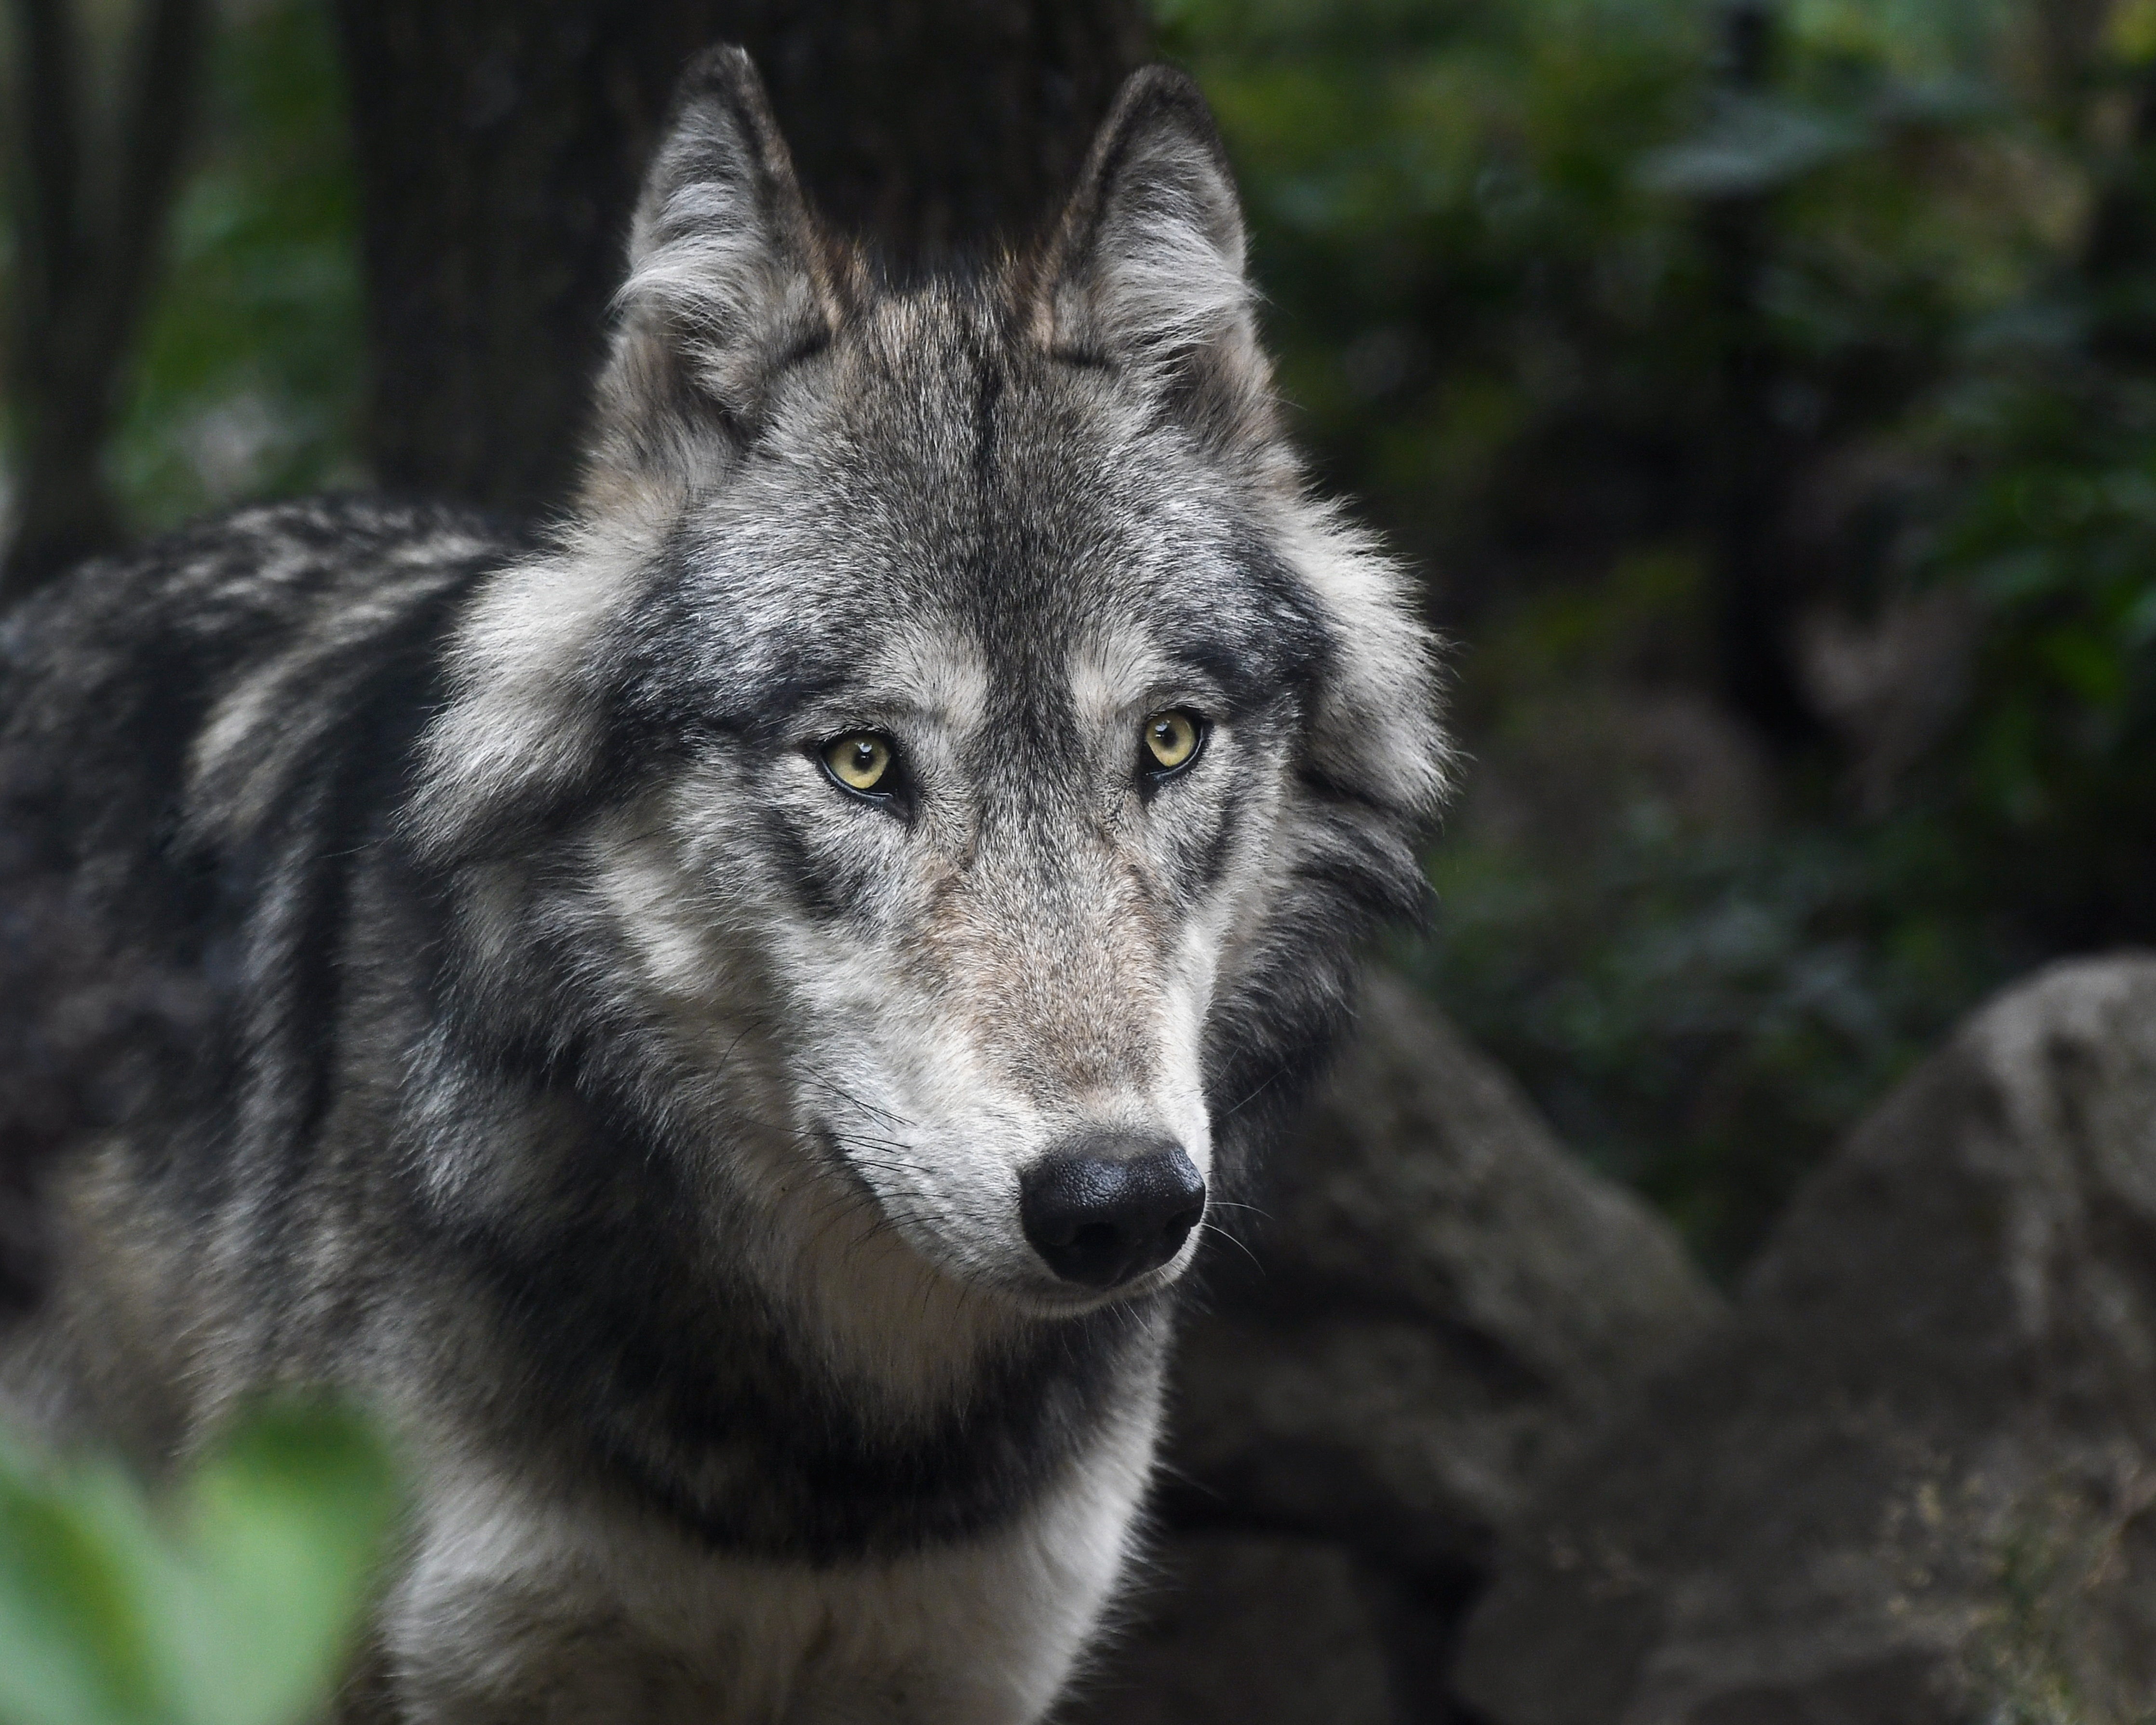 78964 download wallpaper wolf, animals, muzzle, predator, sight, opinion screensavers and pictures for free